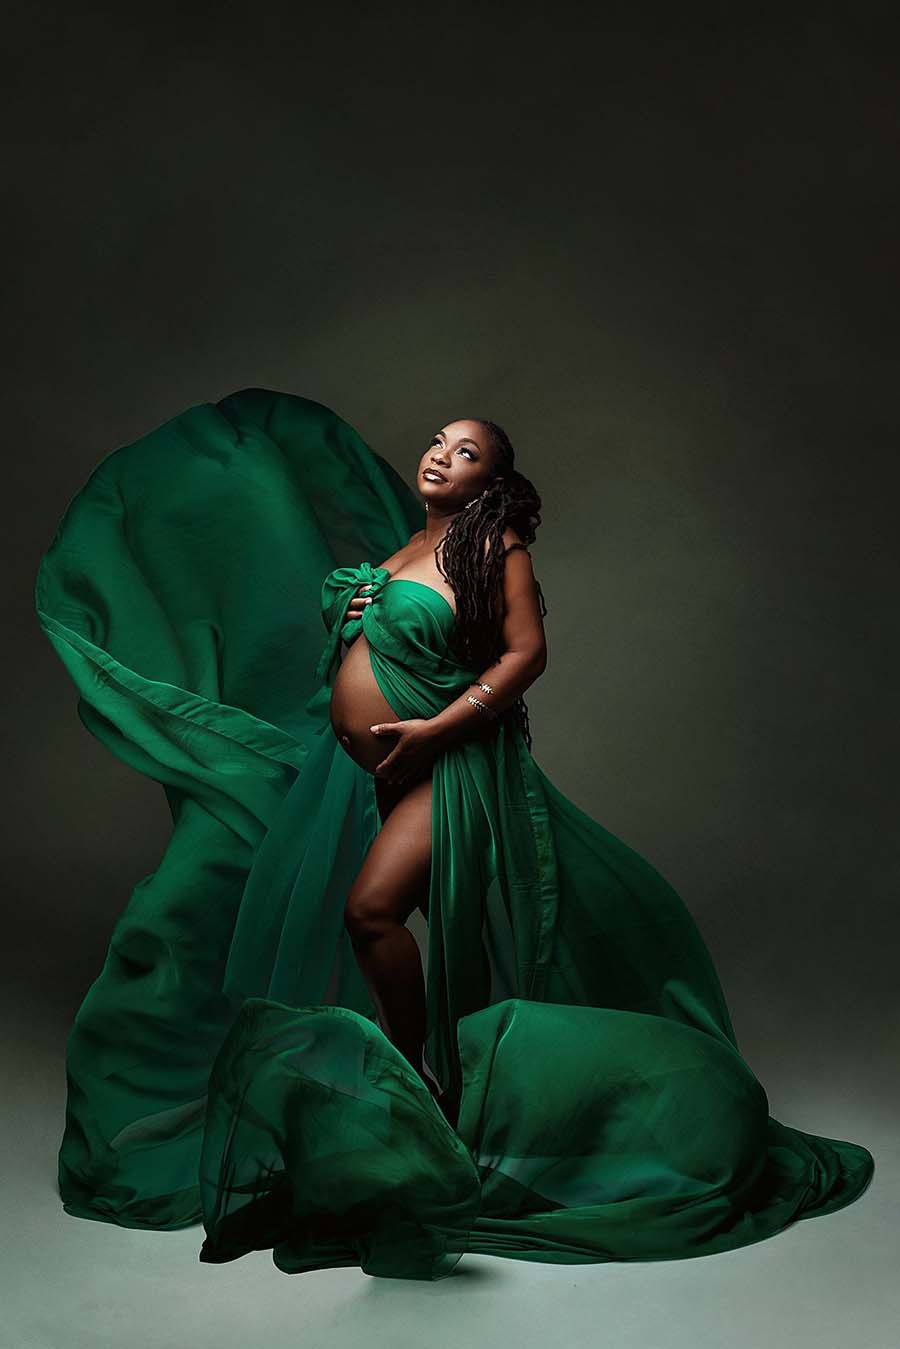 Pregnant model poses in a studio wearing a draping fabric in green color covering her chest area and leaving belly and legs uncovered. She faces up while holding the scarf against her chest with one hand and her bump with the other. 